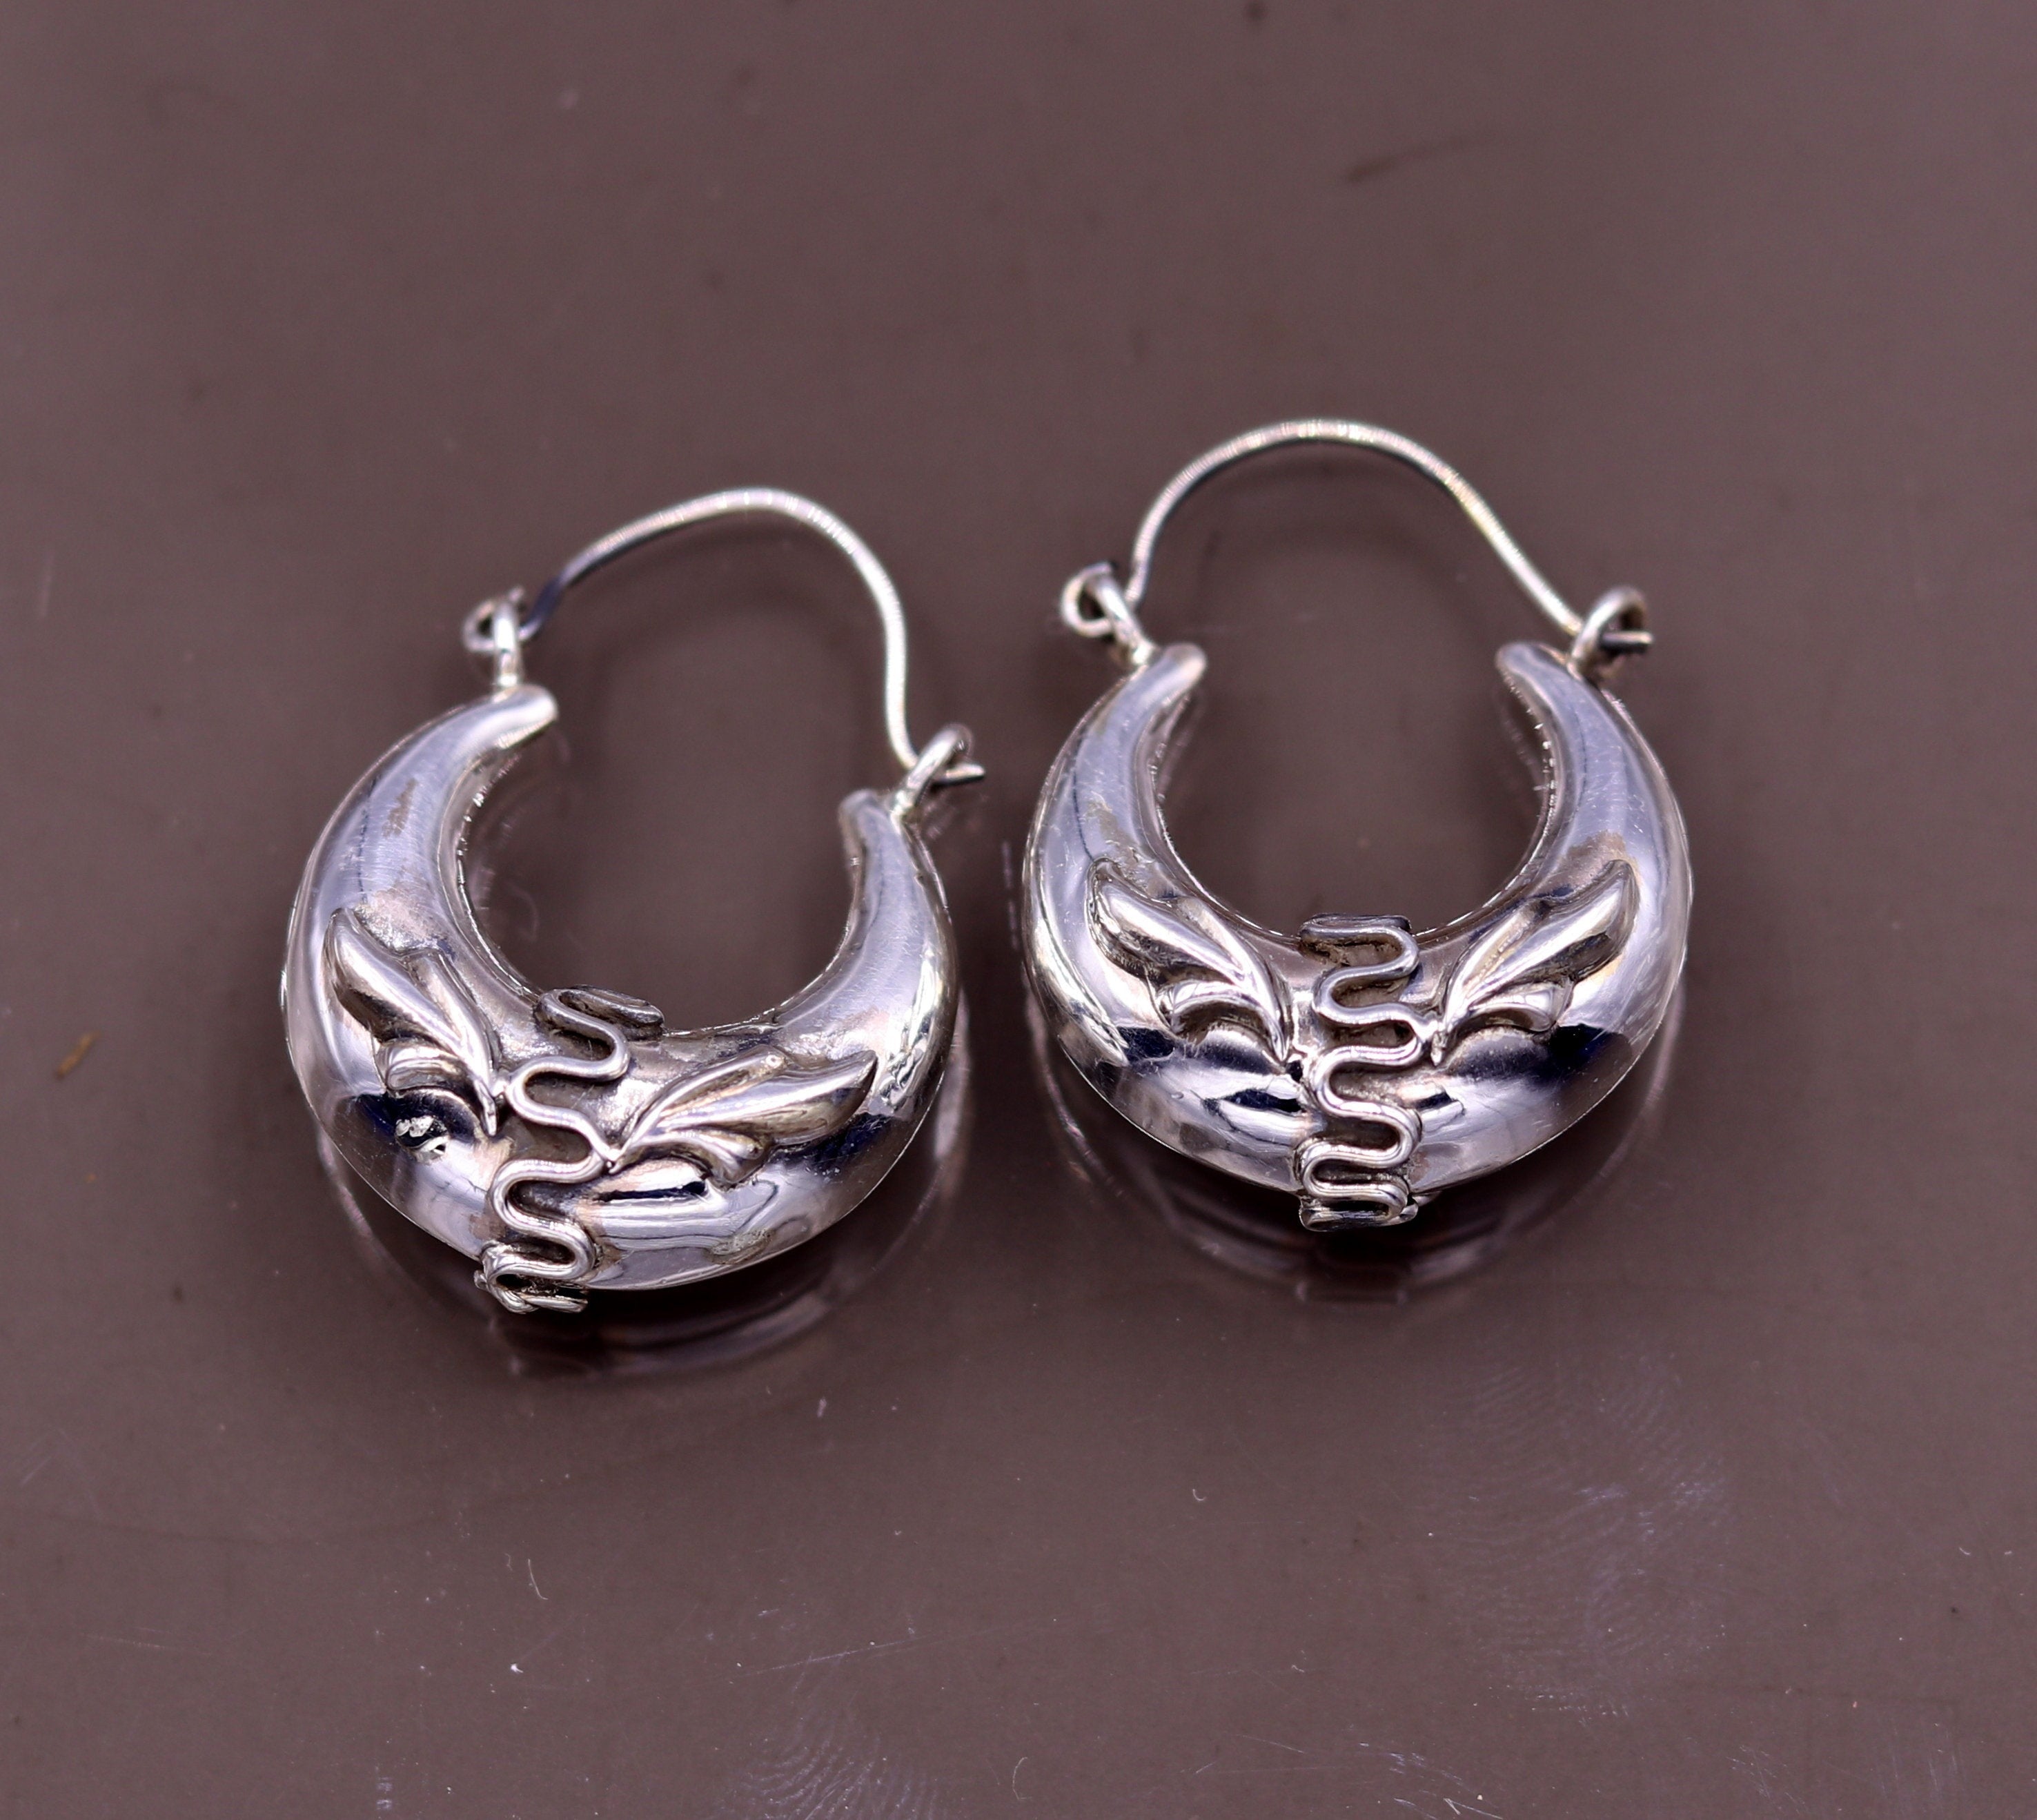 Eloish Sterling Silver Wired Small Size Ball Bali Earrings Silver Online in  India, Buy at Best Price from Firstcry.com - 10943922